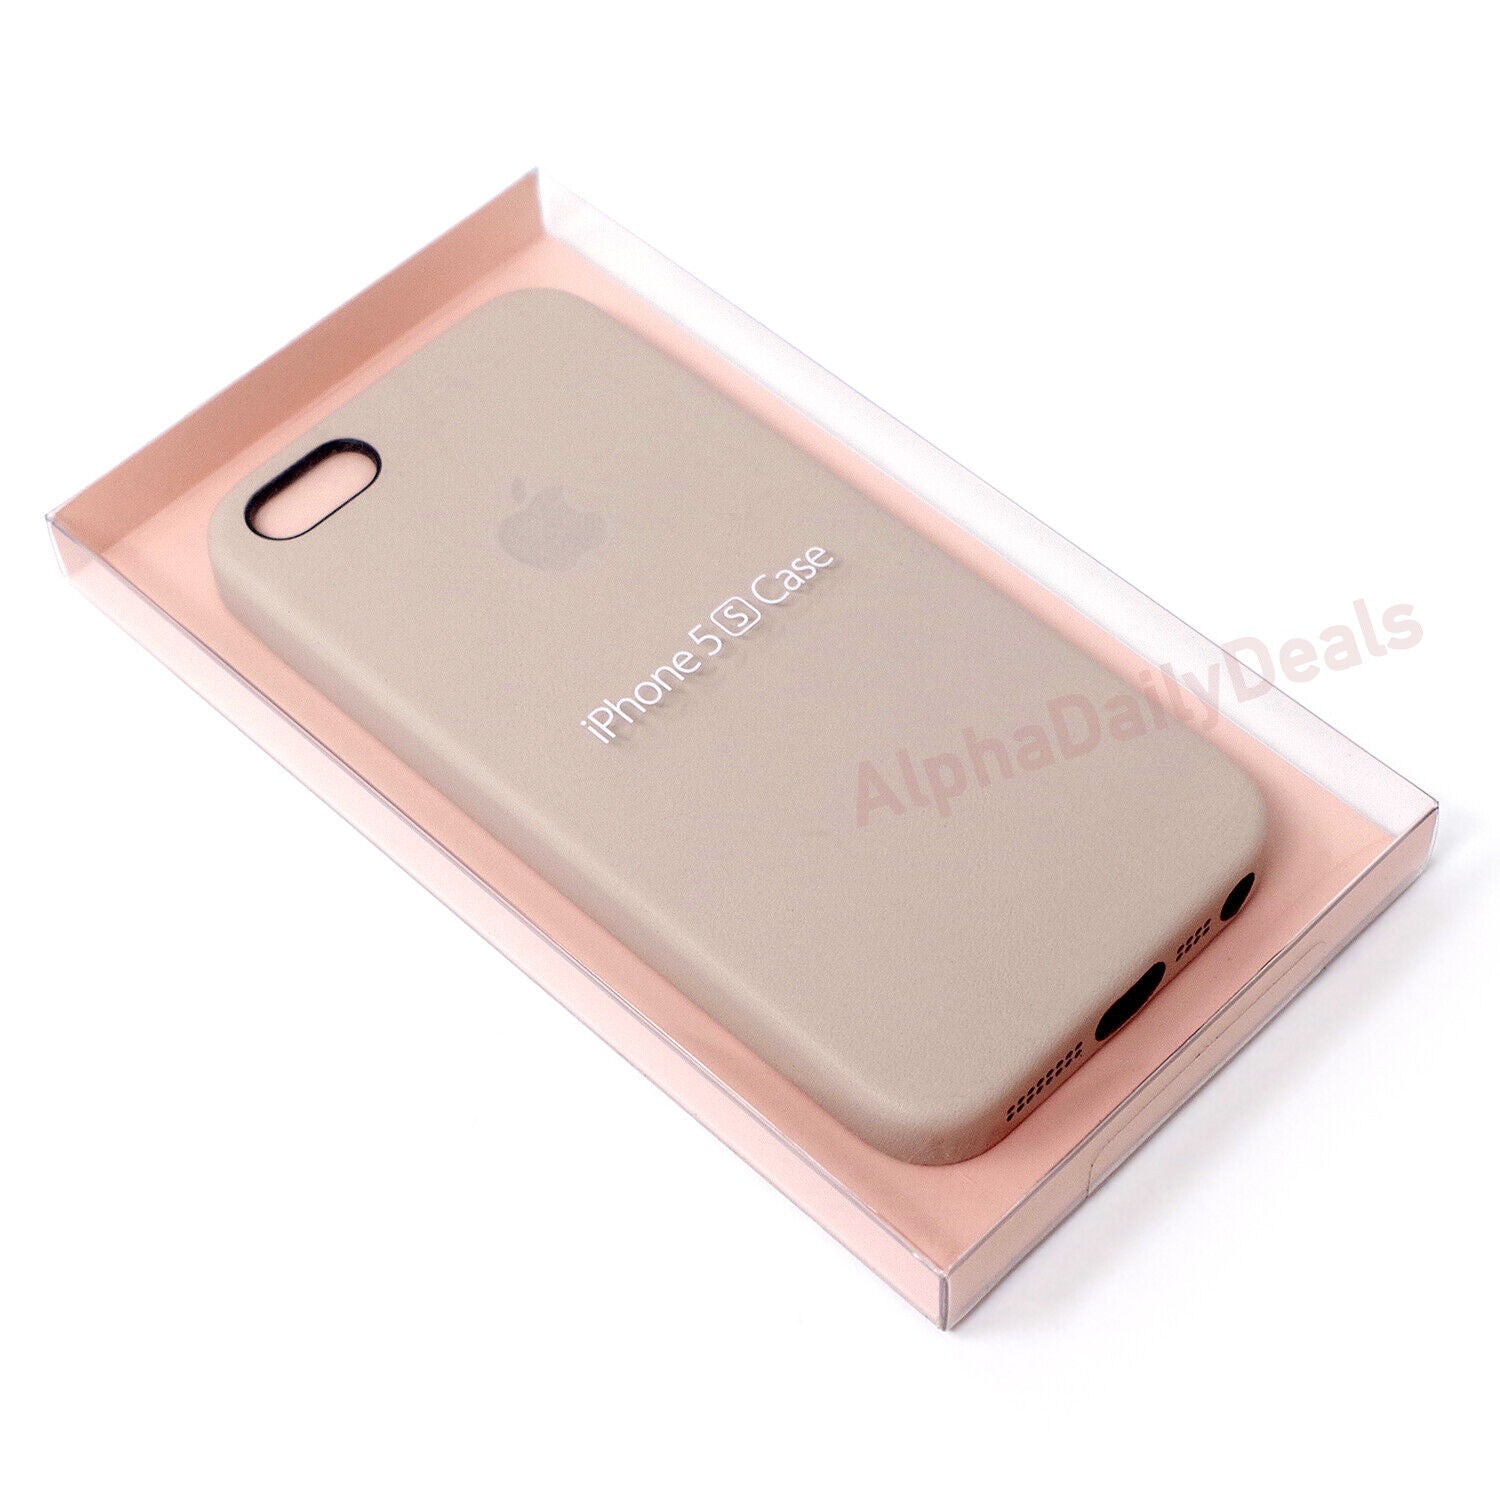 Genuine OEM Apple Beige Leather Case for iPhone 5 5S SE